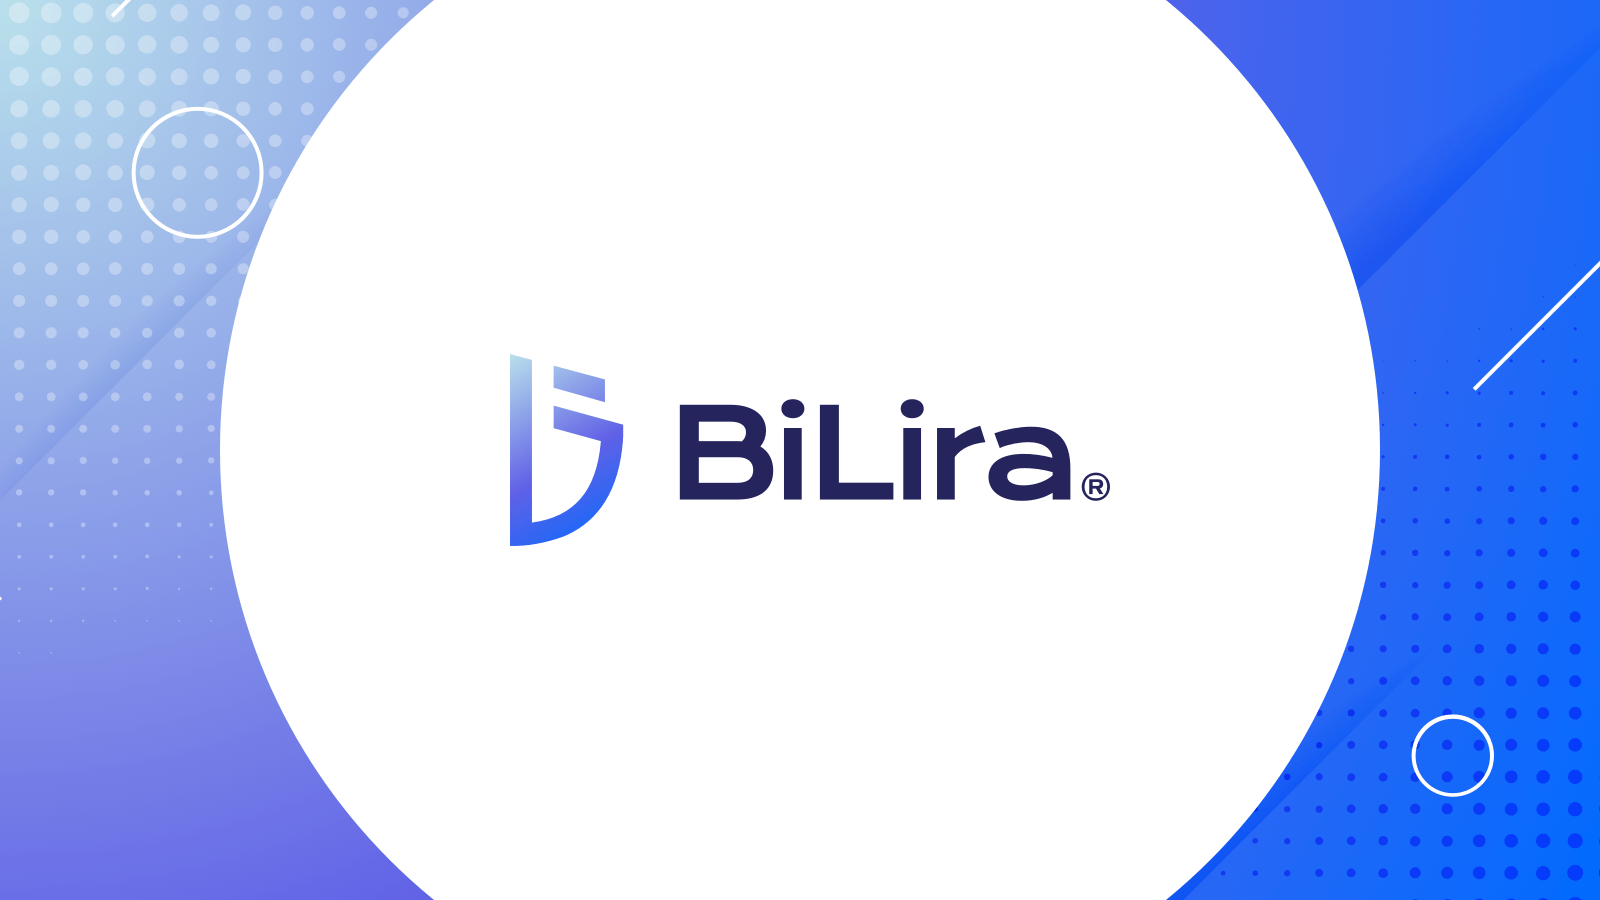 BiLira (TRYB) 101: Discover the Turkey's First Stablecoin